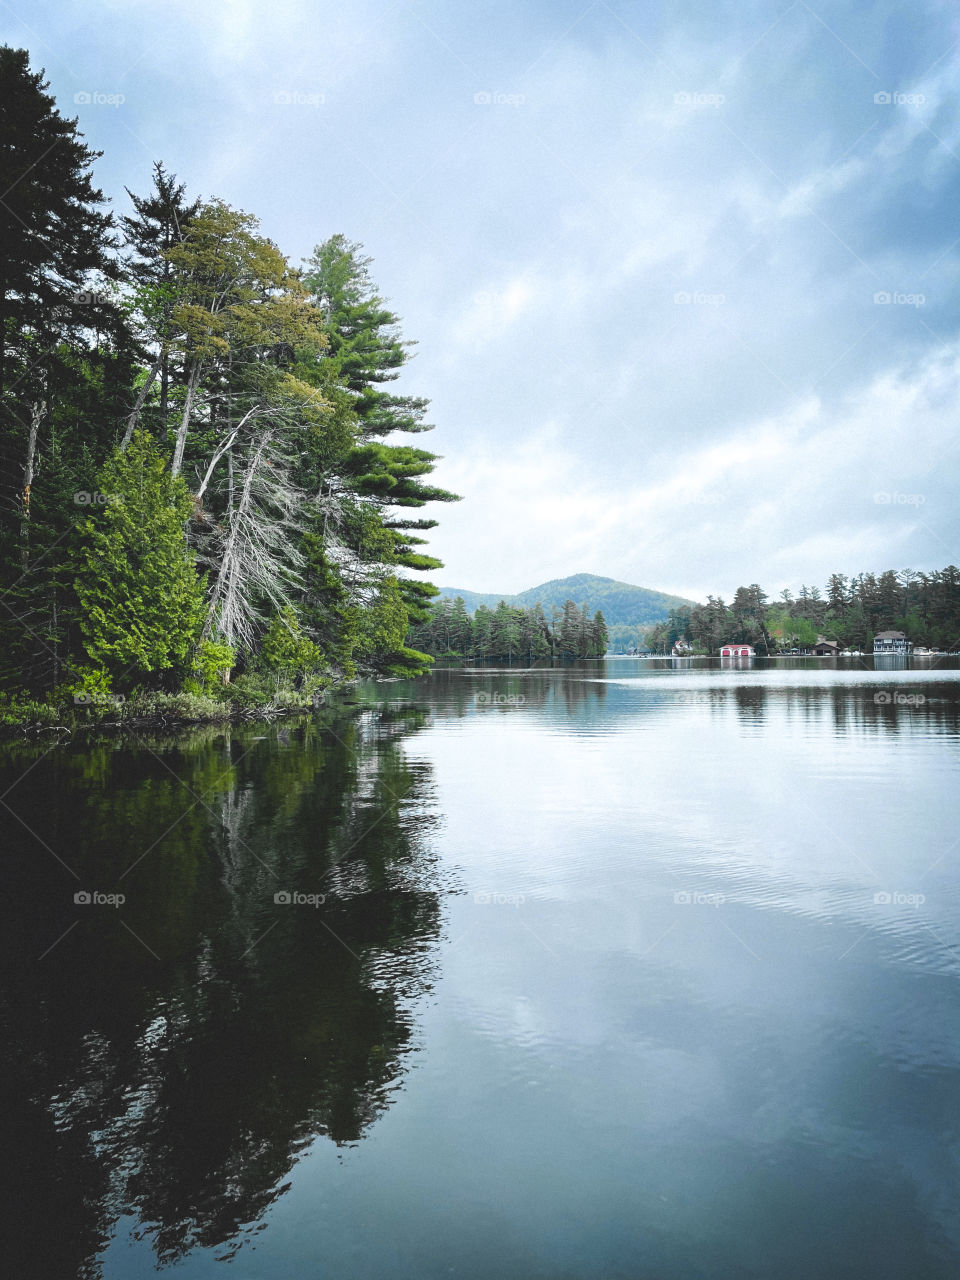 A cloudy day on lake placid with beautiful green trees.